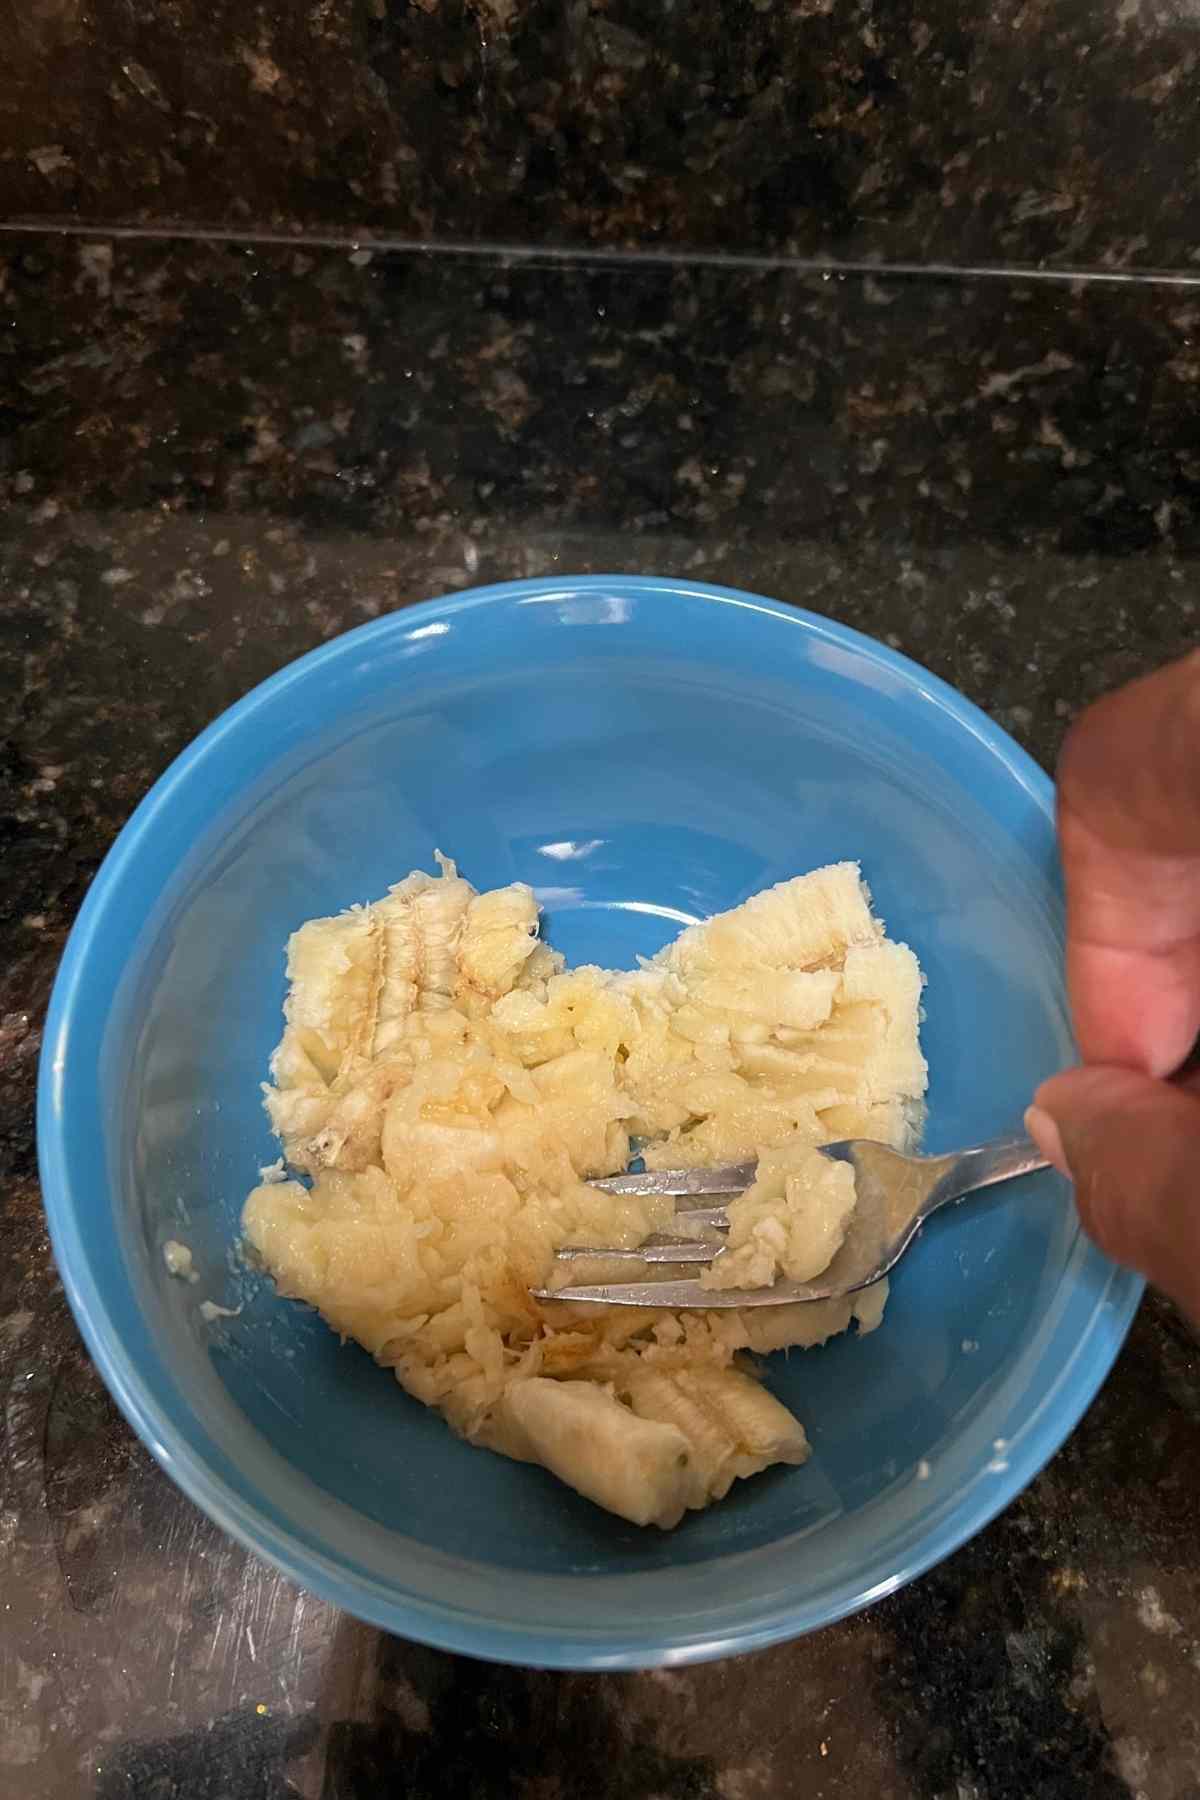 a banana mashed in a blue bowl